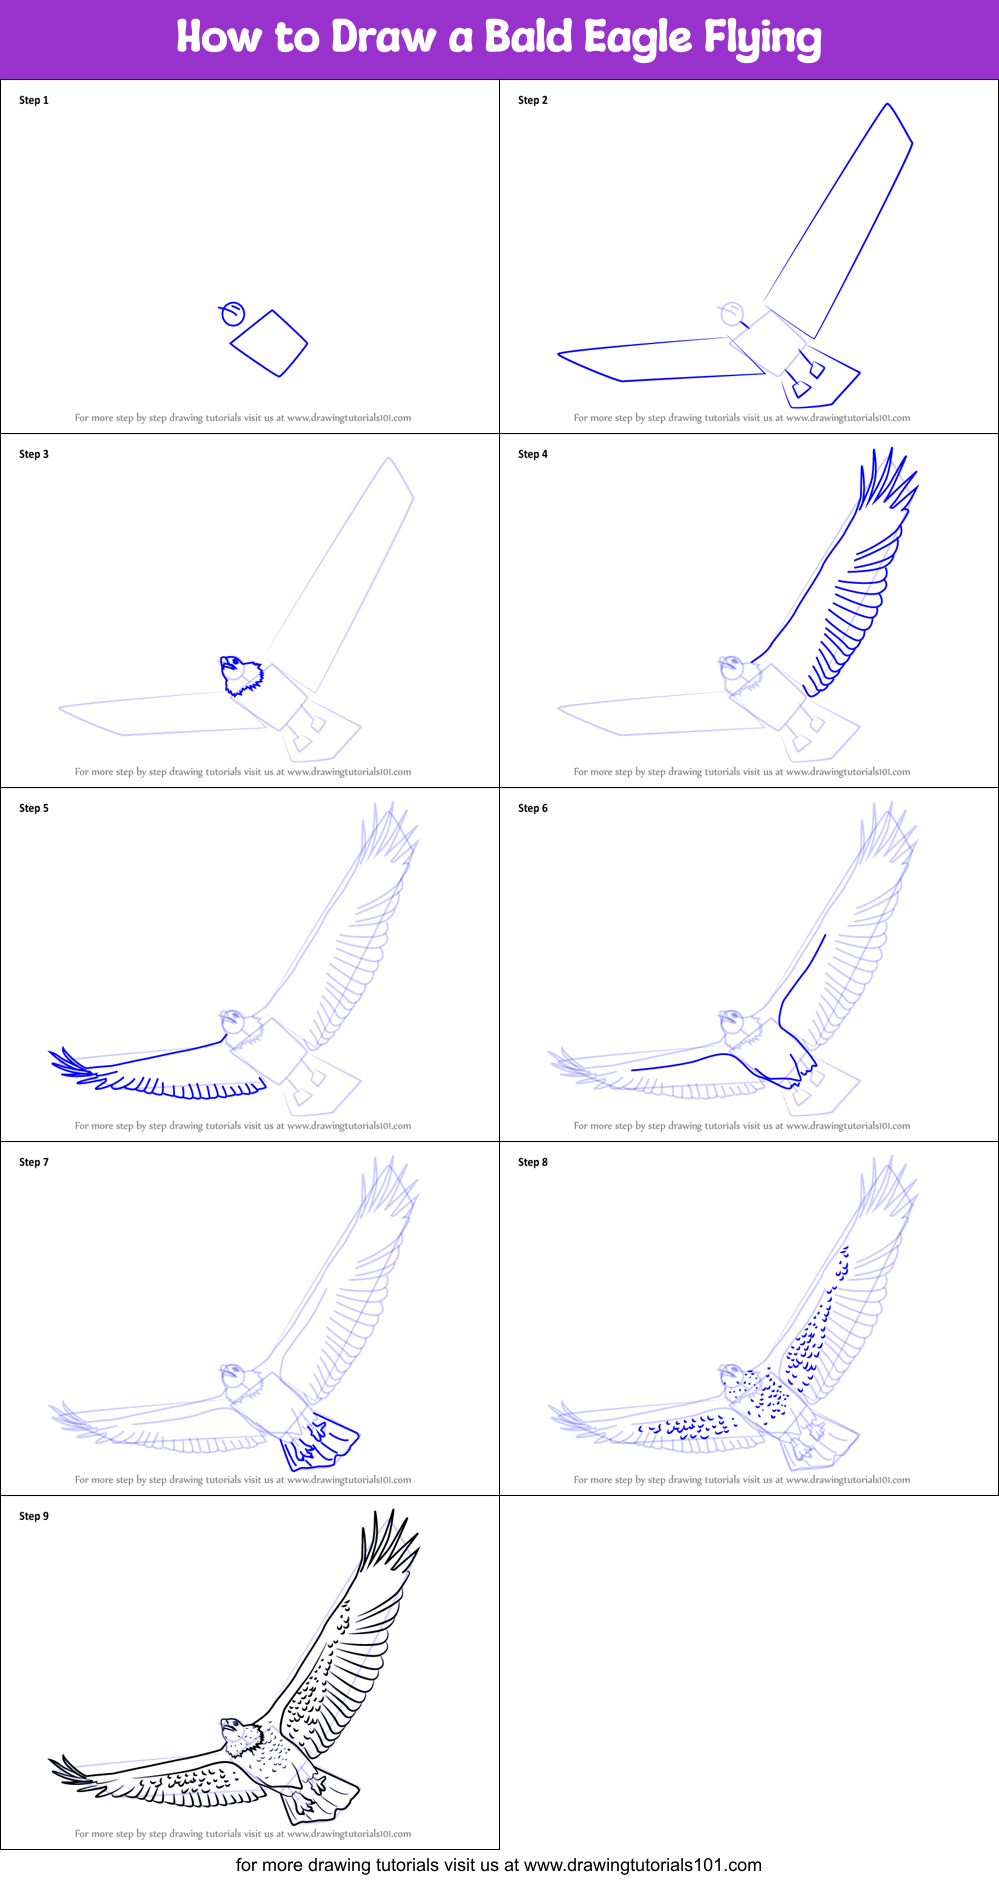 How to Draw a Bald Eagle Flying printable step by step drawing sheet